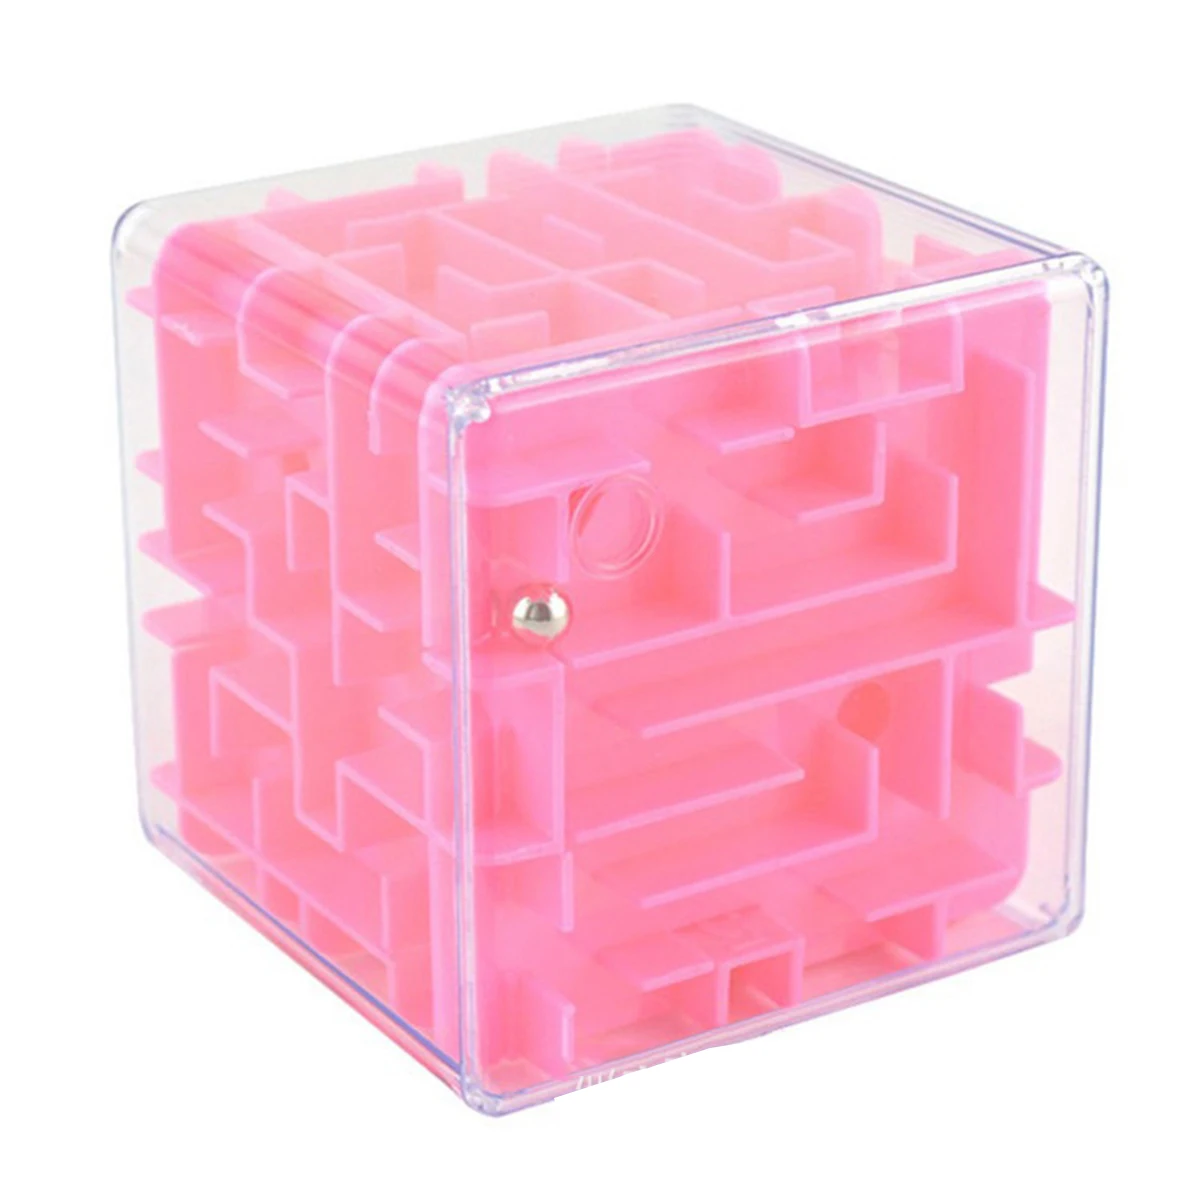 

3D Mini Speed Maze Magic Cube Puzzle Game Cubos Magicos Learning Educational Toys Labyrinth Rolling Ball Toy Children Adult